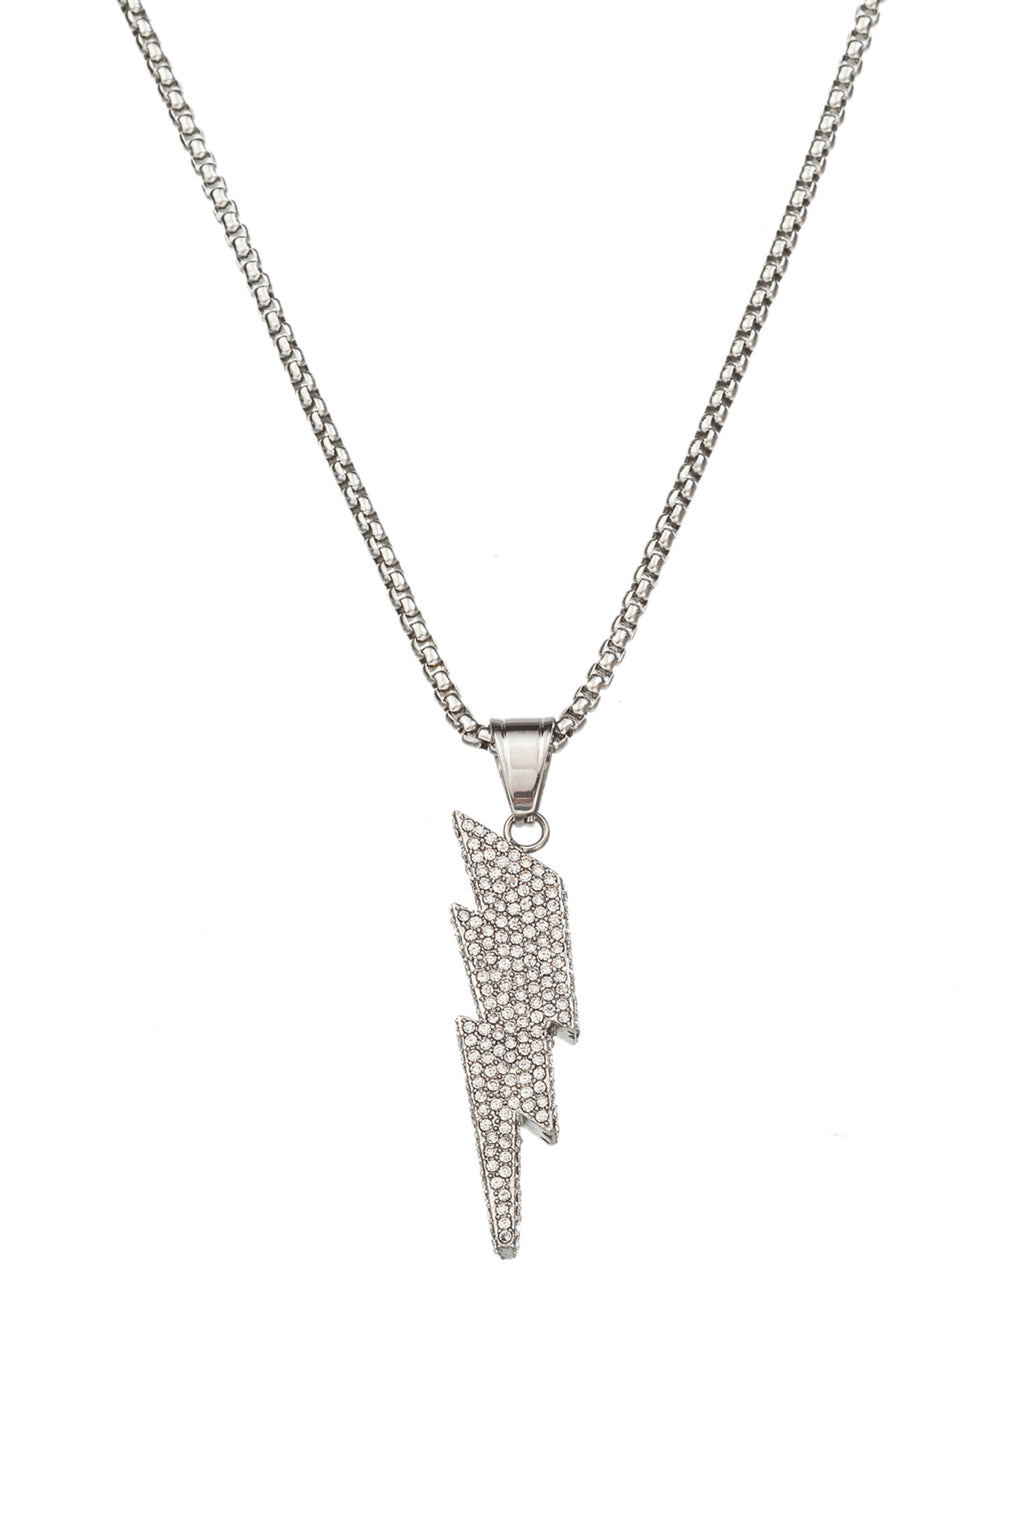 Silver tone titanium thunderbolt pendant necklace studded with CZ crystals.